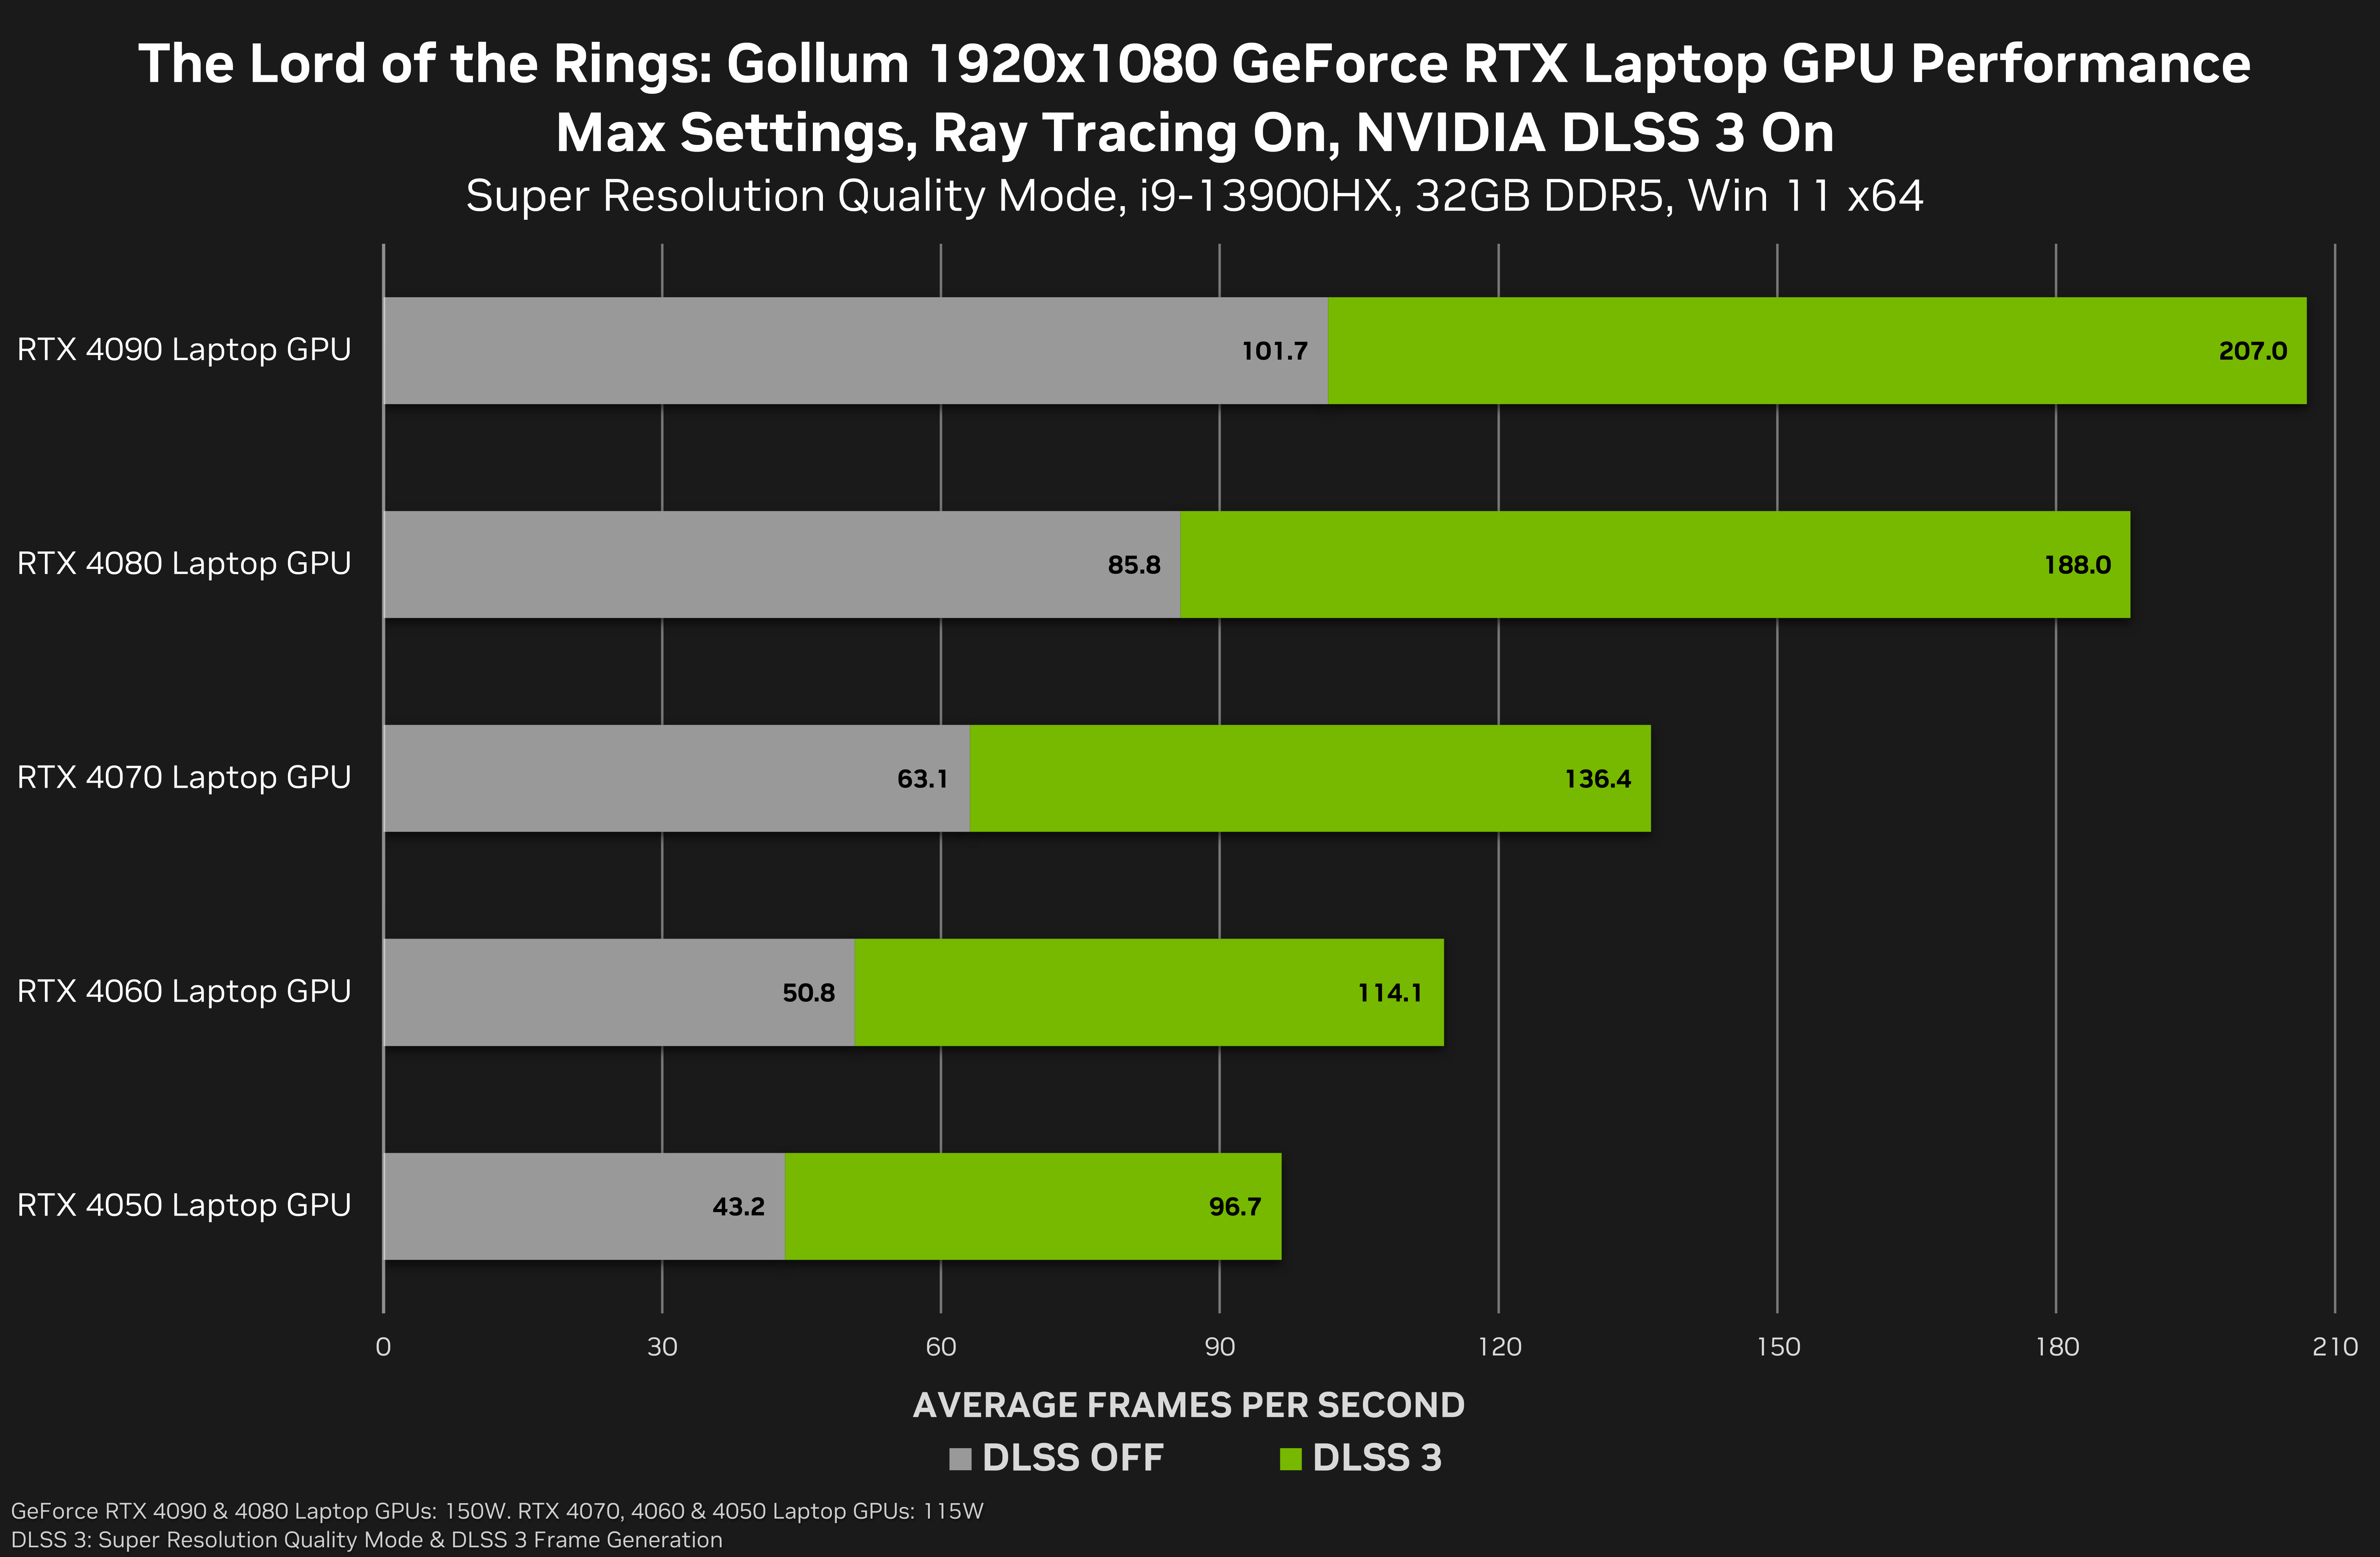 NVIDIA Announces GeForce RTX 4060 Family: RTX 4060 Ti, RTX 4060, Starting  at $299, 16 GB Available